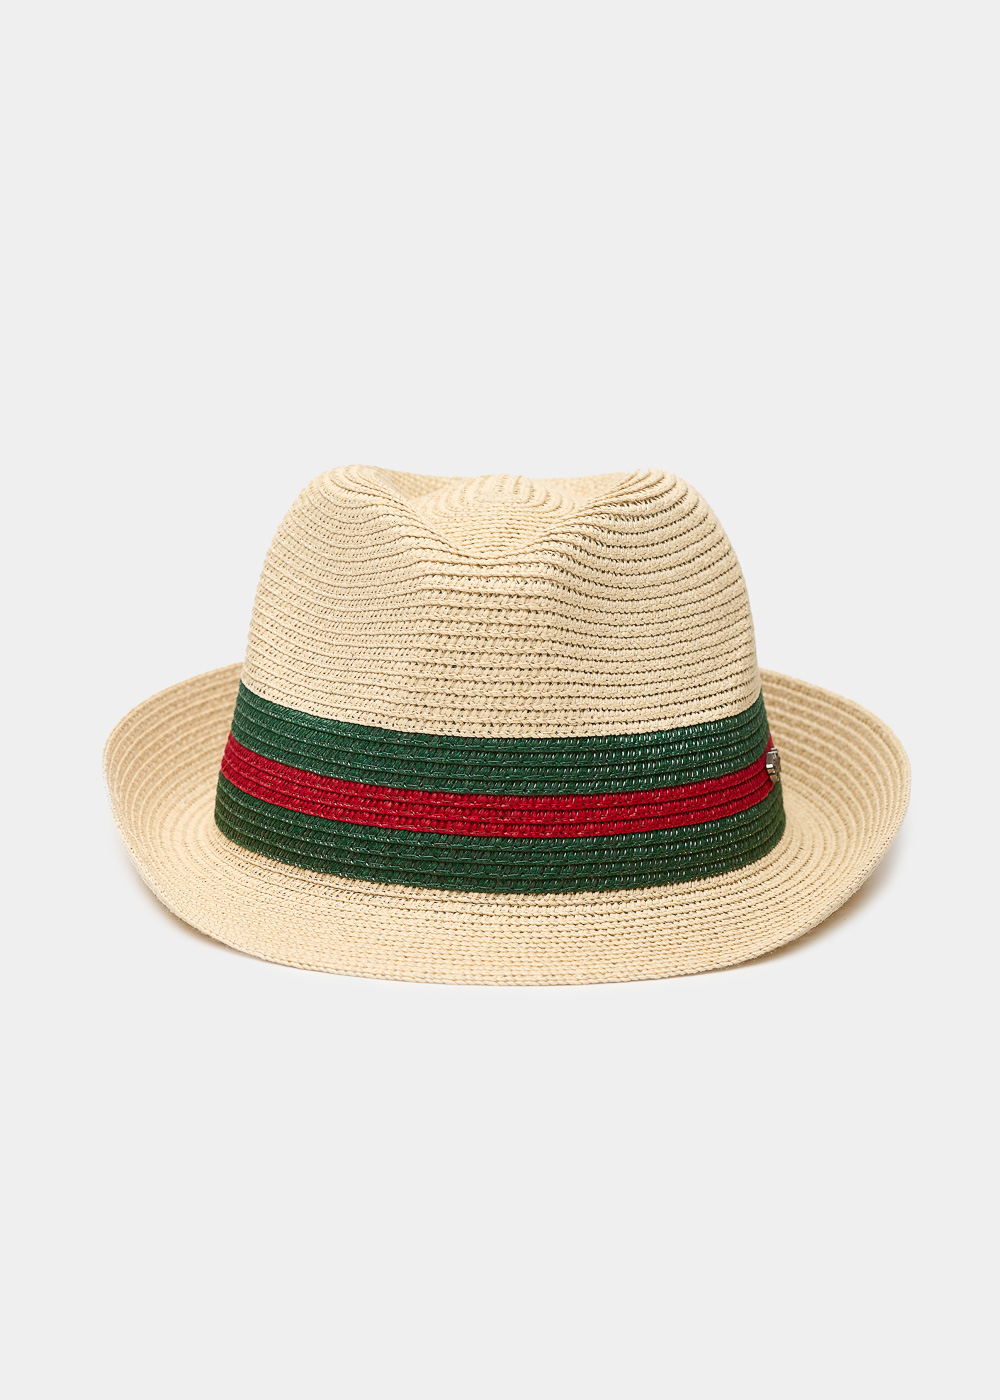 Beige fedora with green & red details